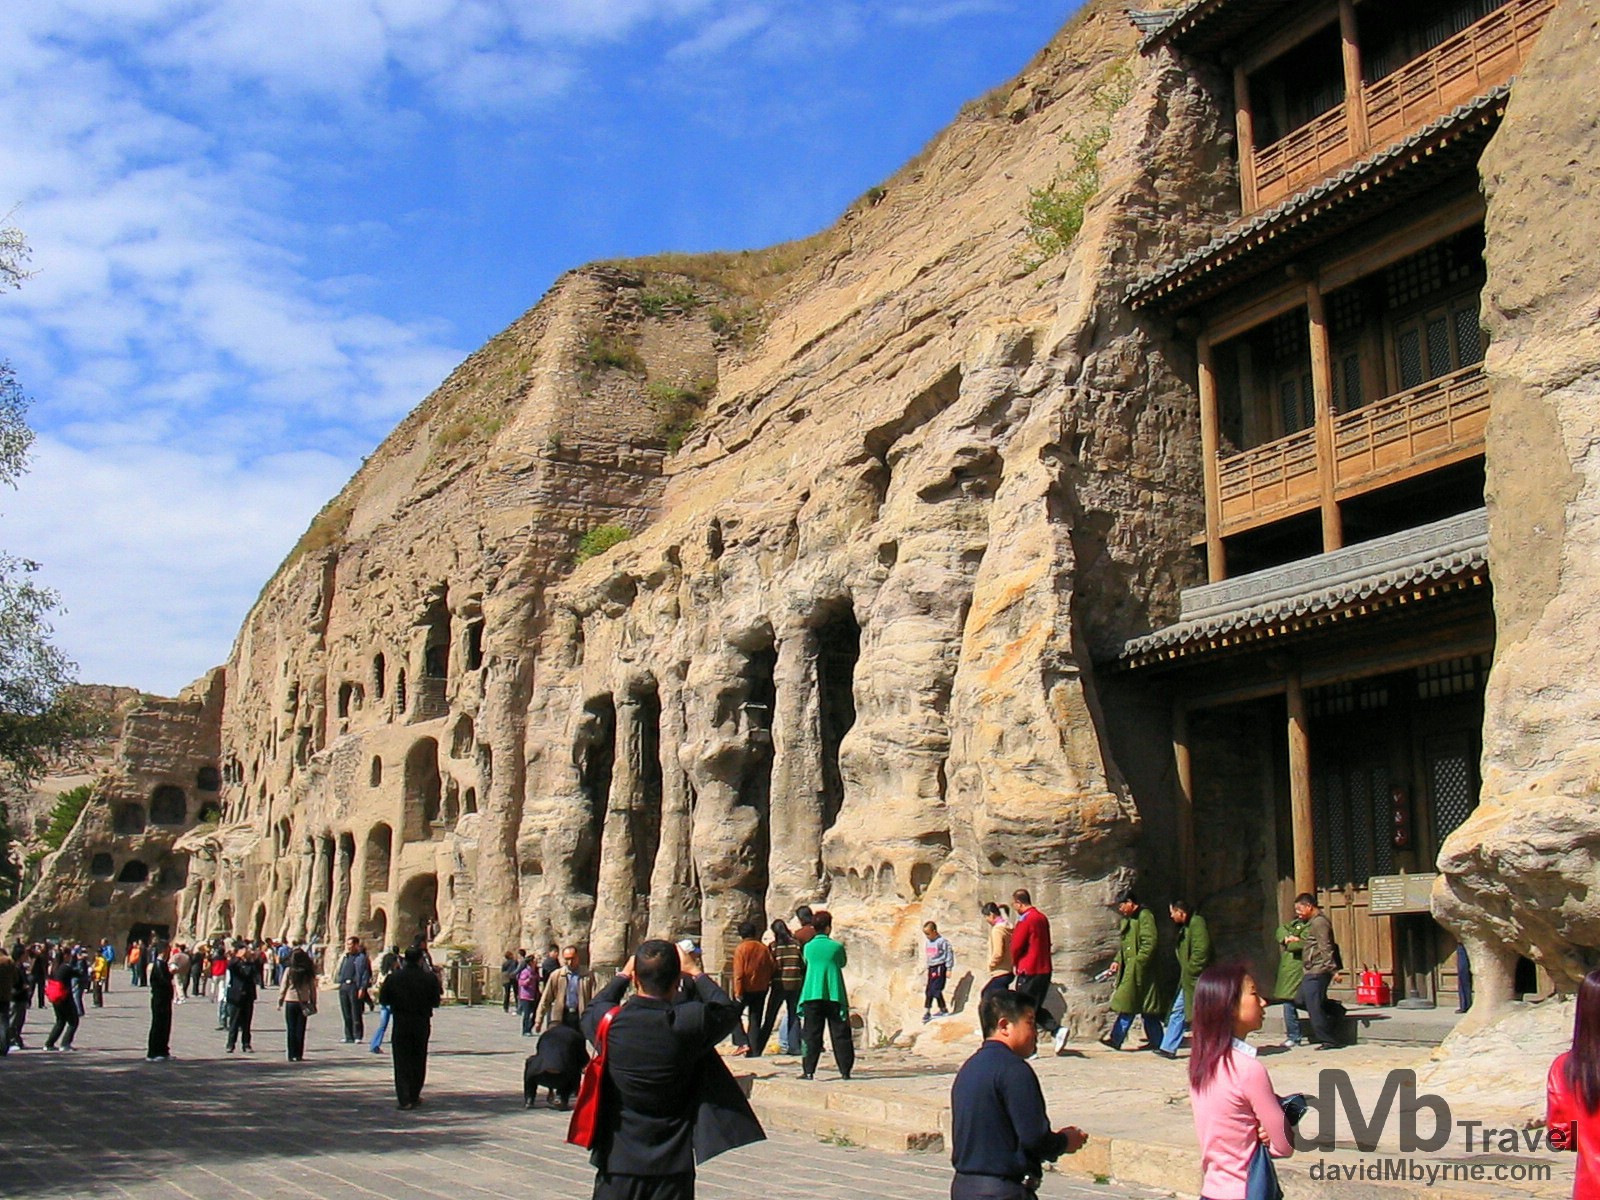 A section of the UNESCO listed Yungang Cave Complex in Shanxi Province, China. October 2nd, 2004.